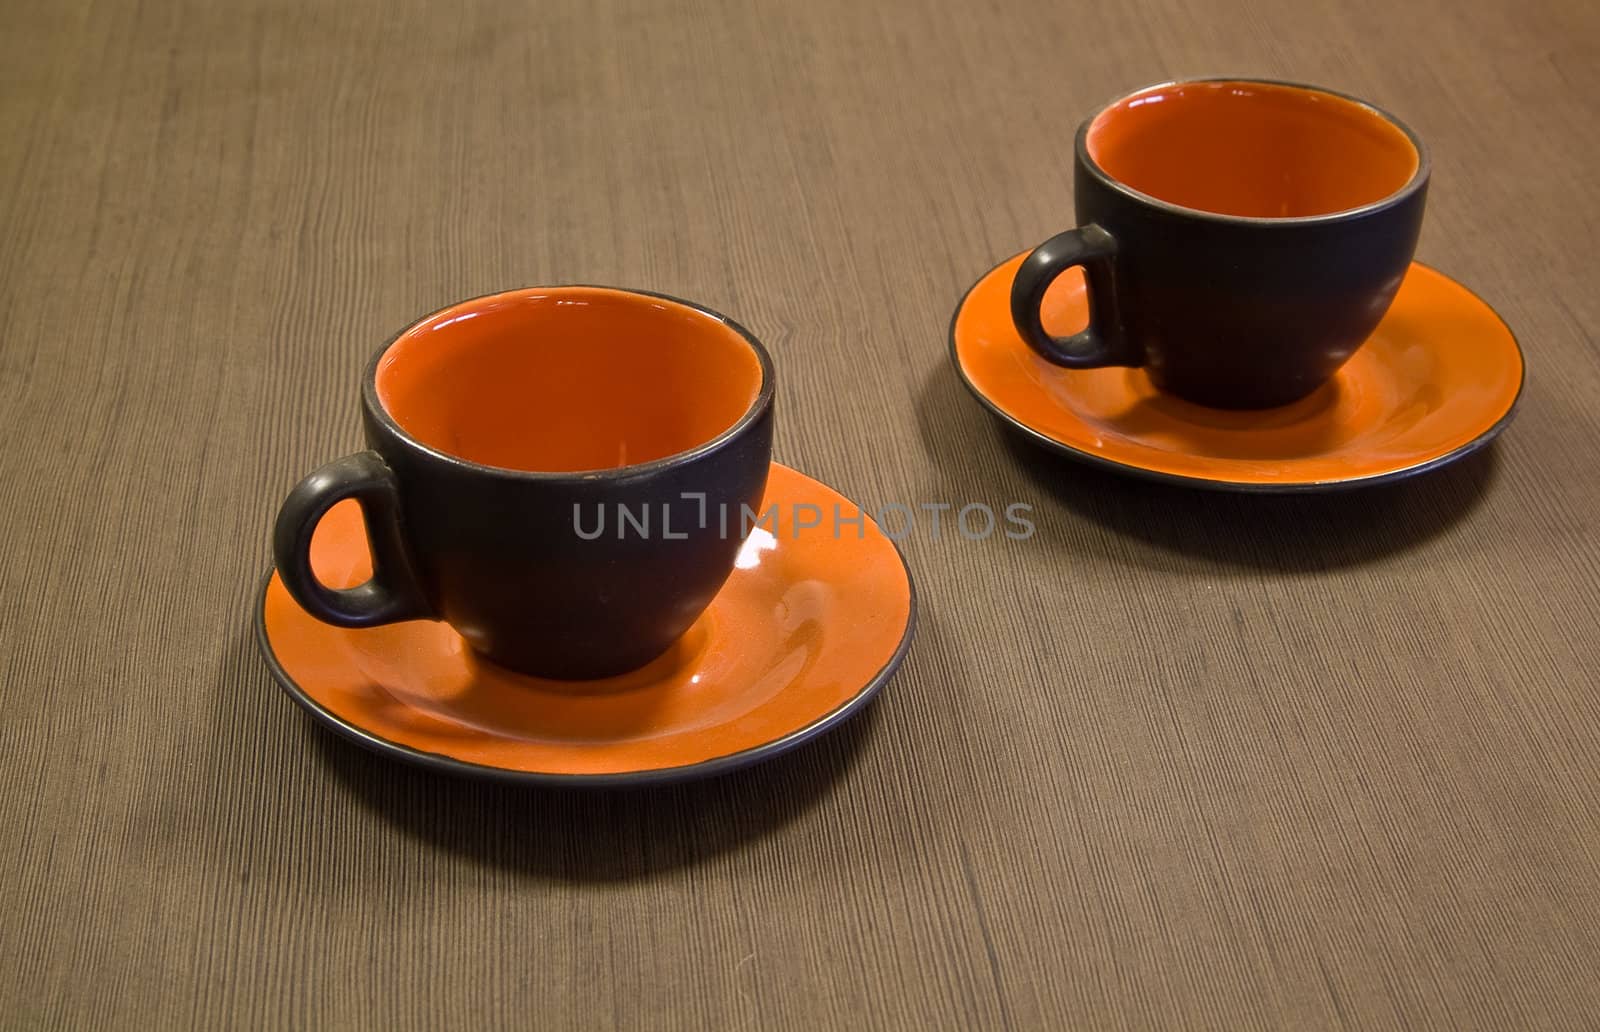 Pair cups on the table by palomnik